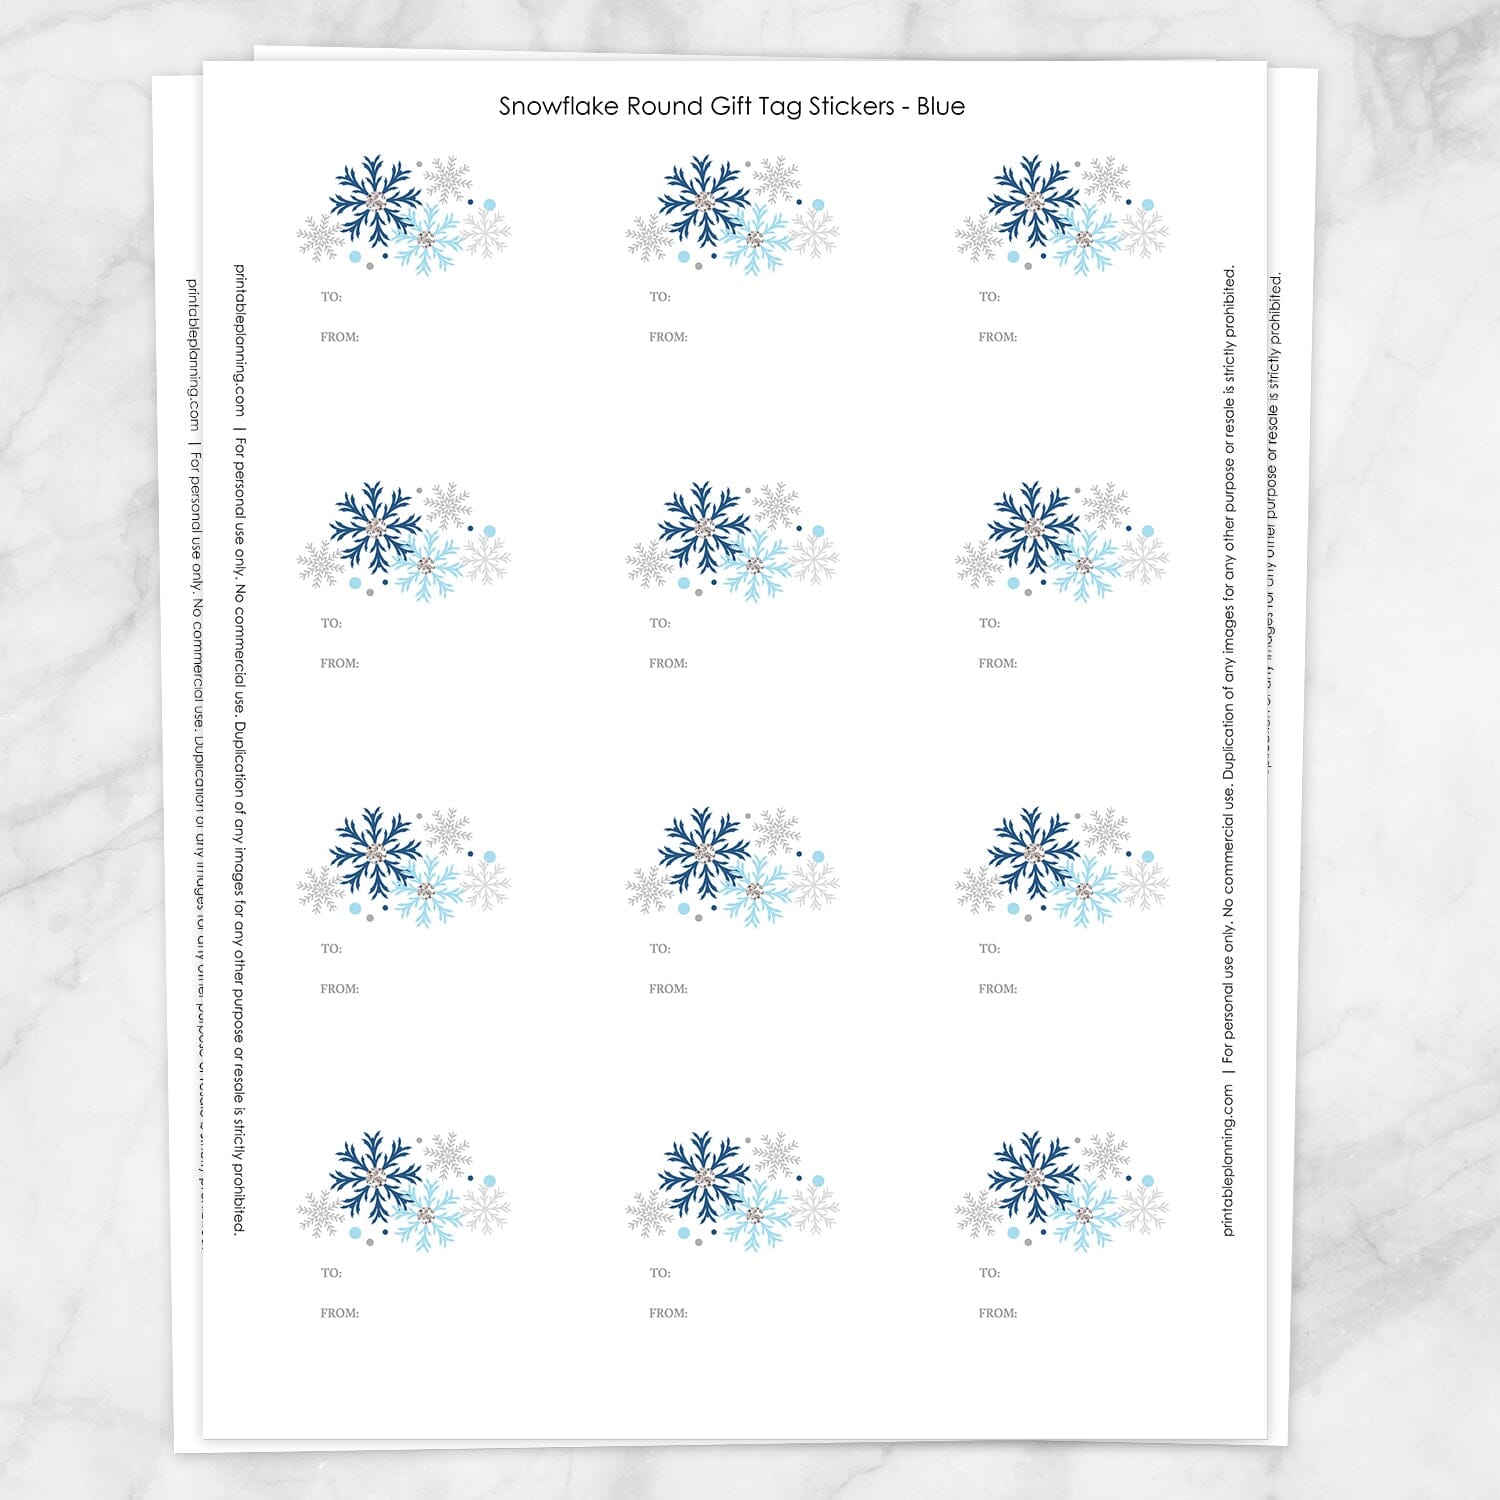 Printable Blue Snowflake Gift Tag Stickers at Printable Planning. Sheet of 12 stickers.